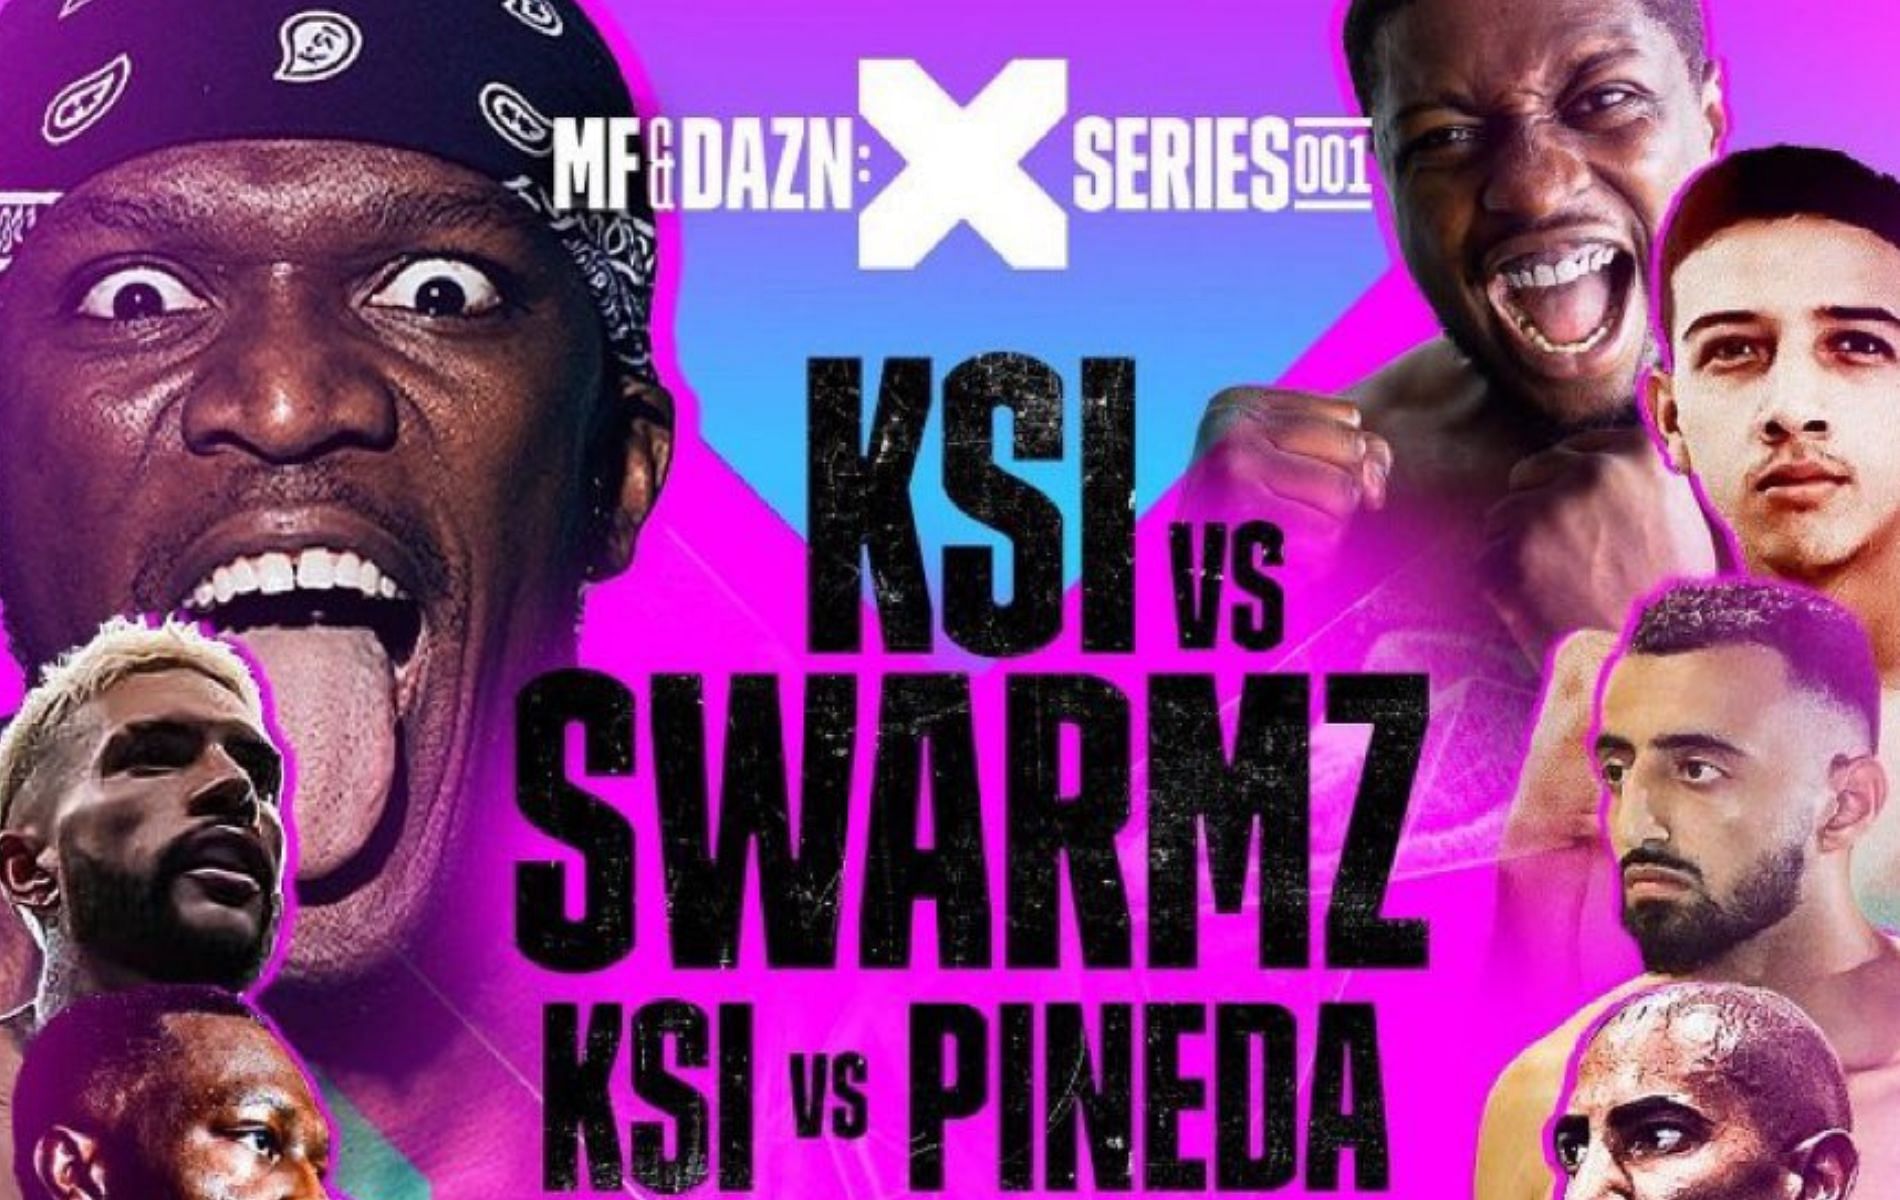 how can i watch the ksi fight